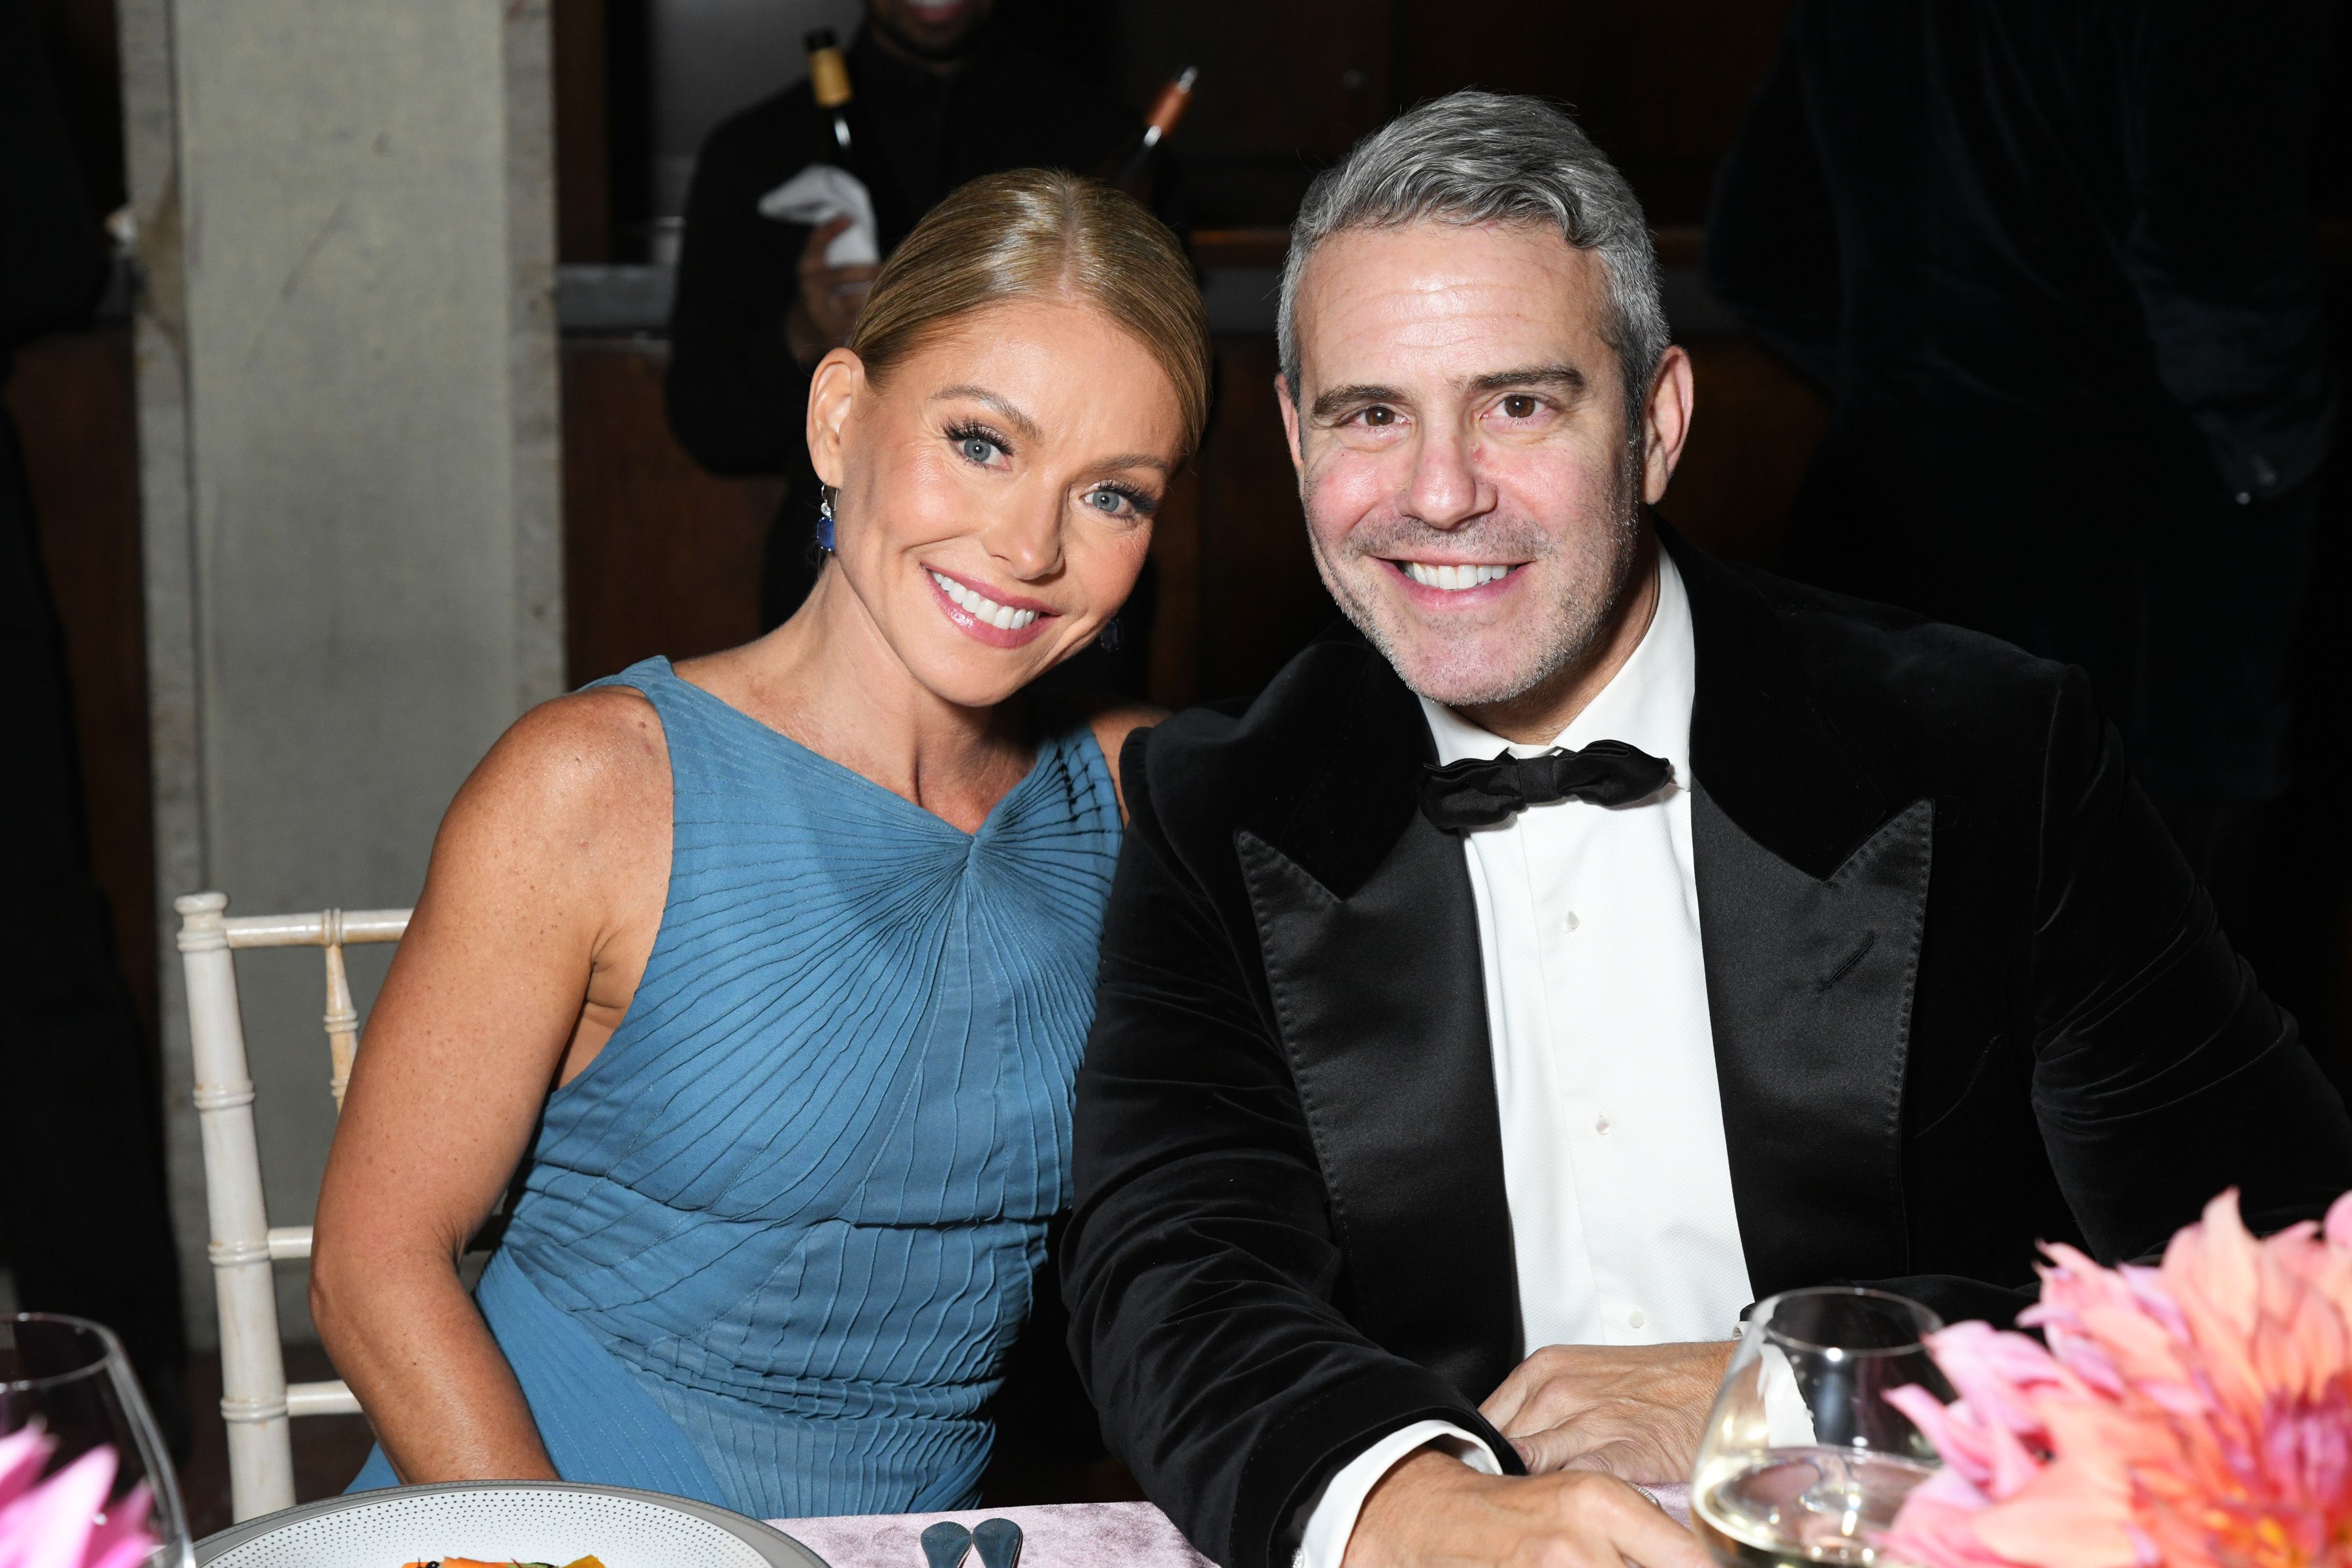 Andy Cohen Says Kelly Ripa's Son Michael Works on 'Real Housewives